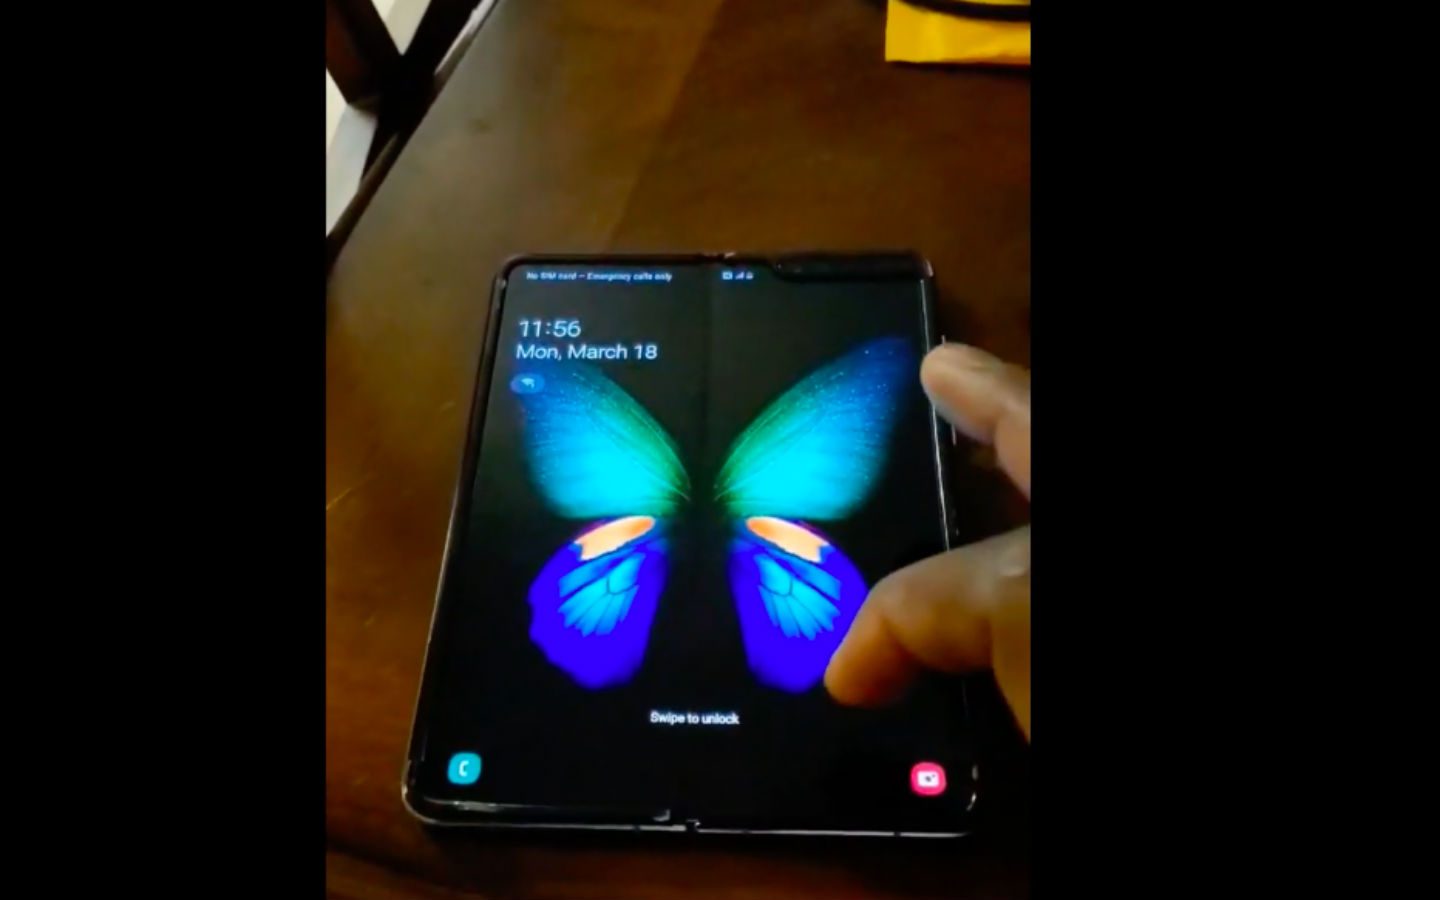 WATCH: Is this the first user-made Samsung Galaxy Fold hands-on video?